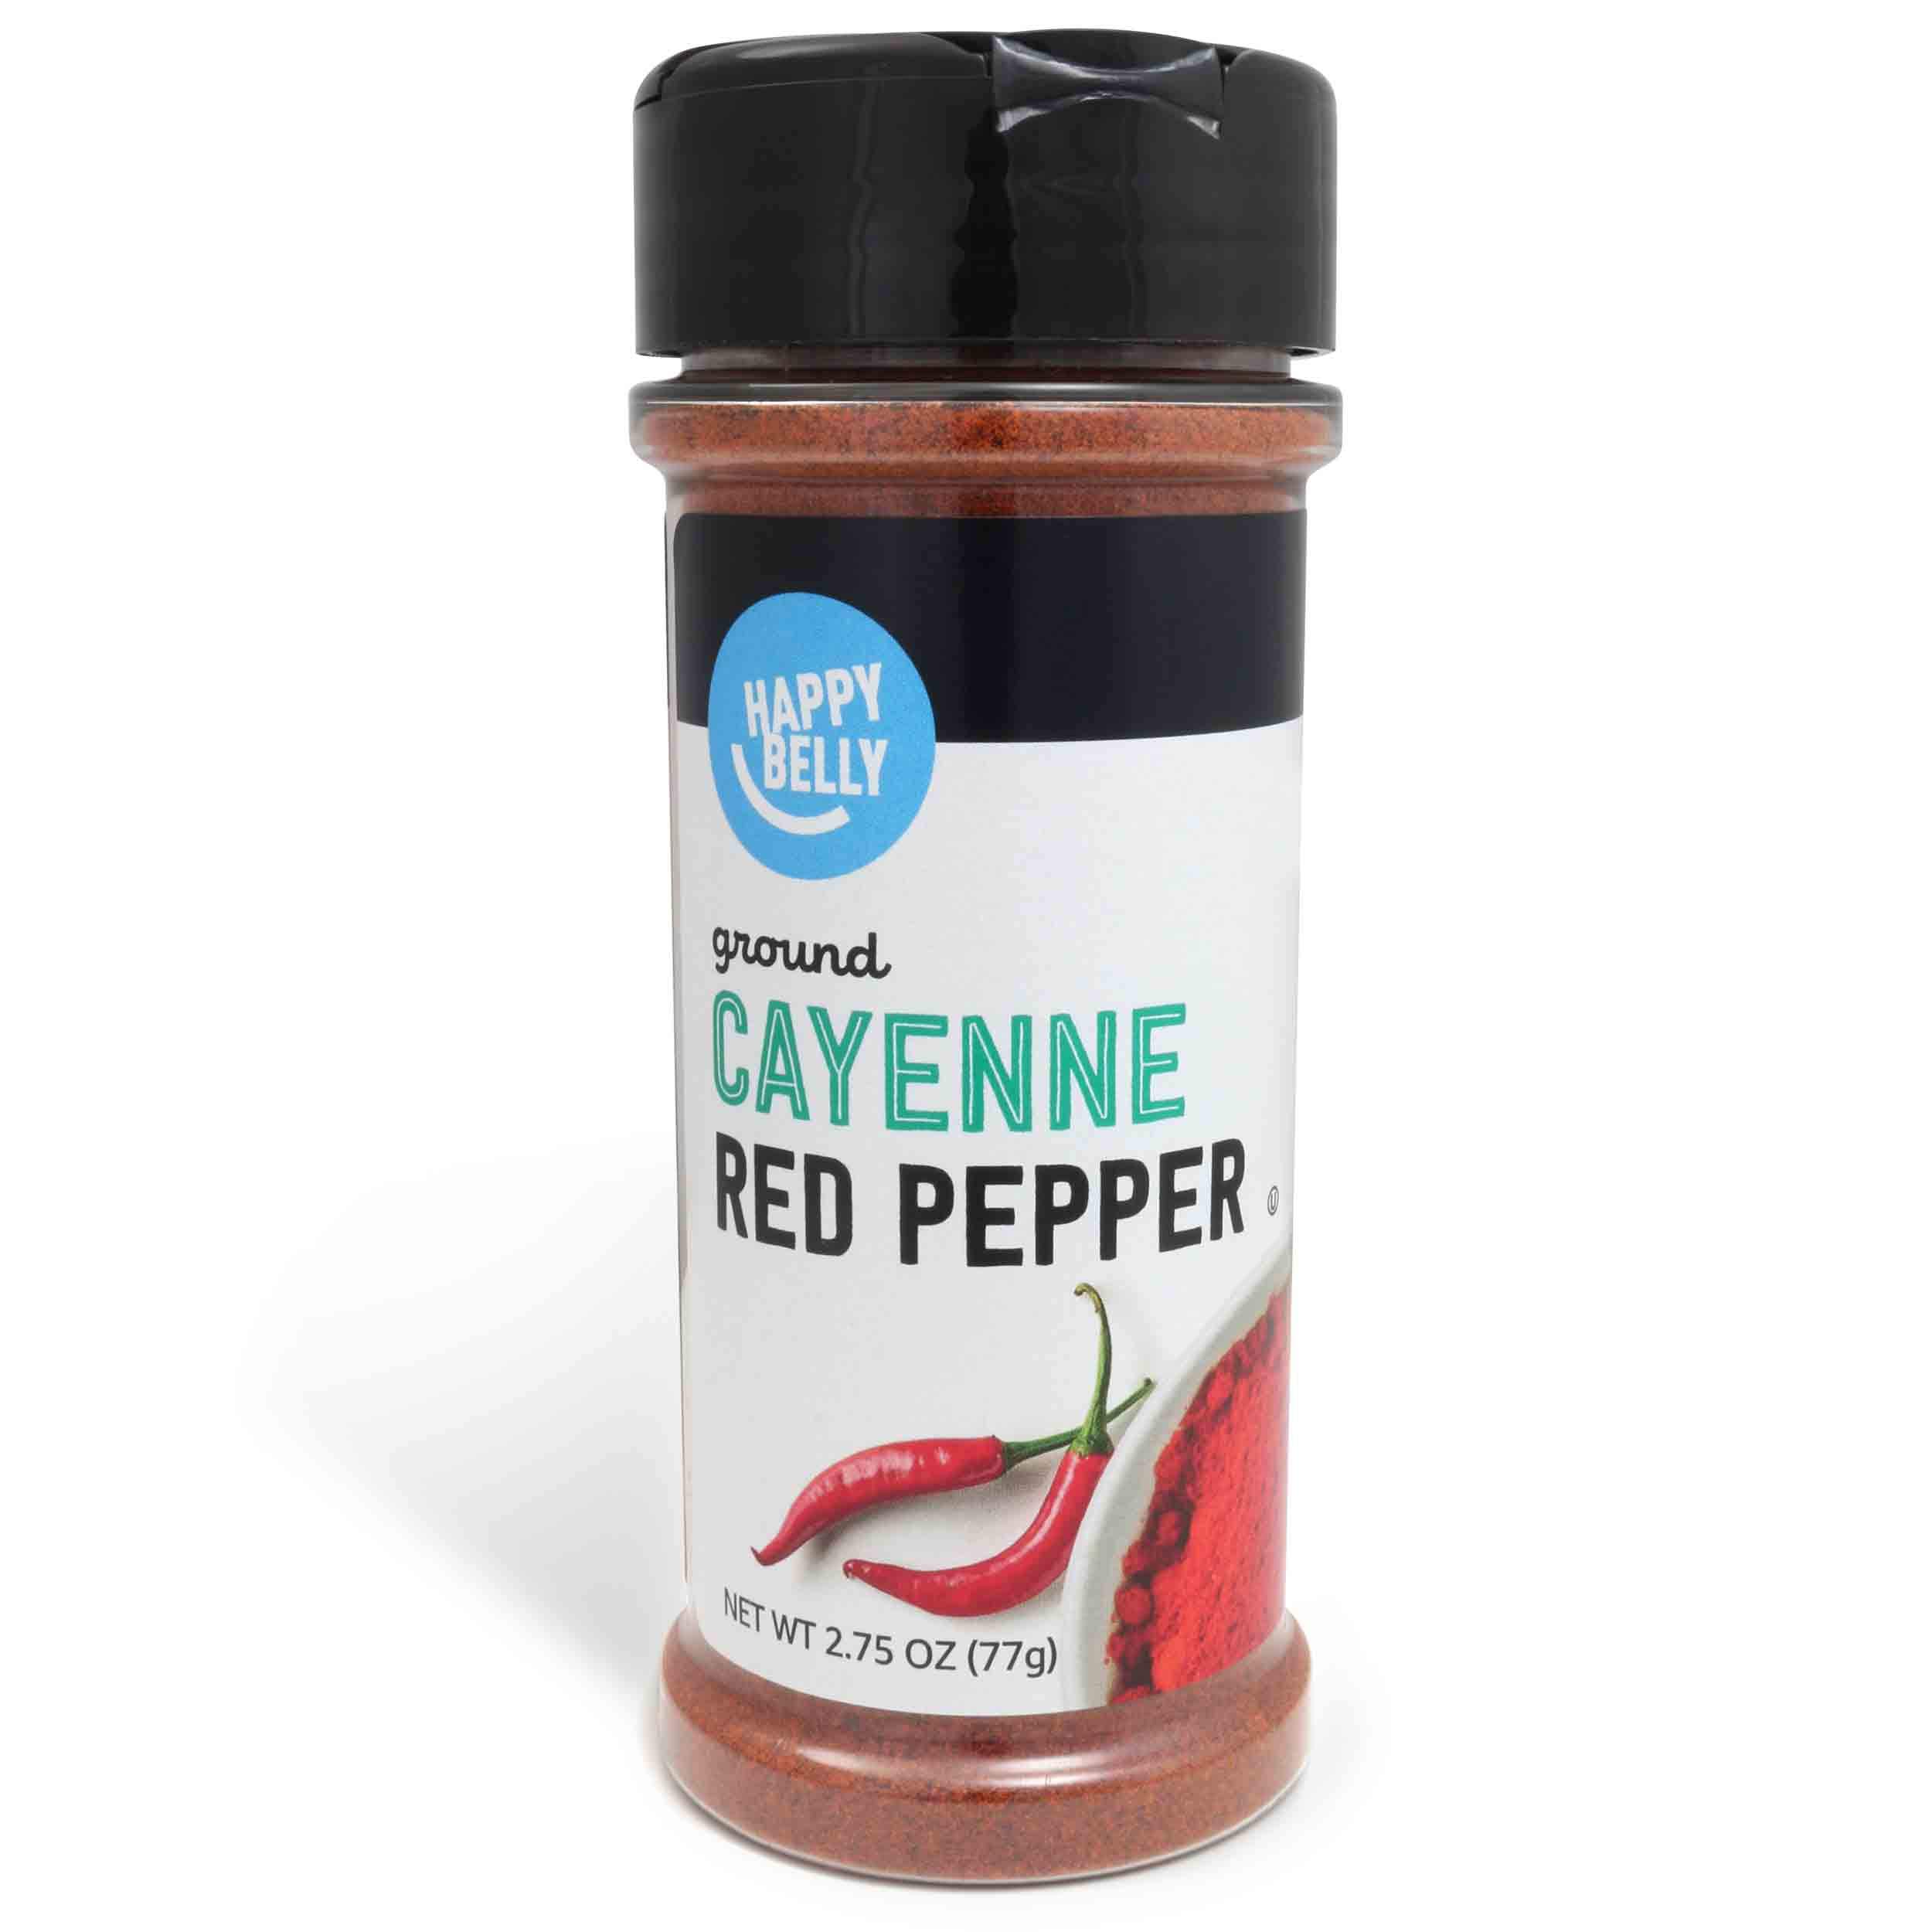 2.75-Oz. Happy Belly Ground Cayenne Red Pepper $2.75, 4-Oz. Happy Belly Prime Steak Seasoning $1.75 + Free Shipping w/ Prime or on $35+